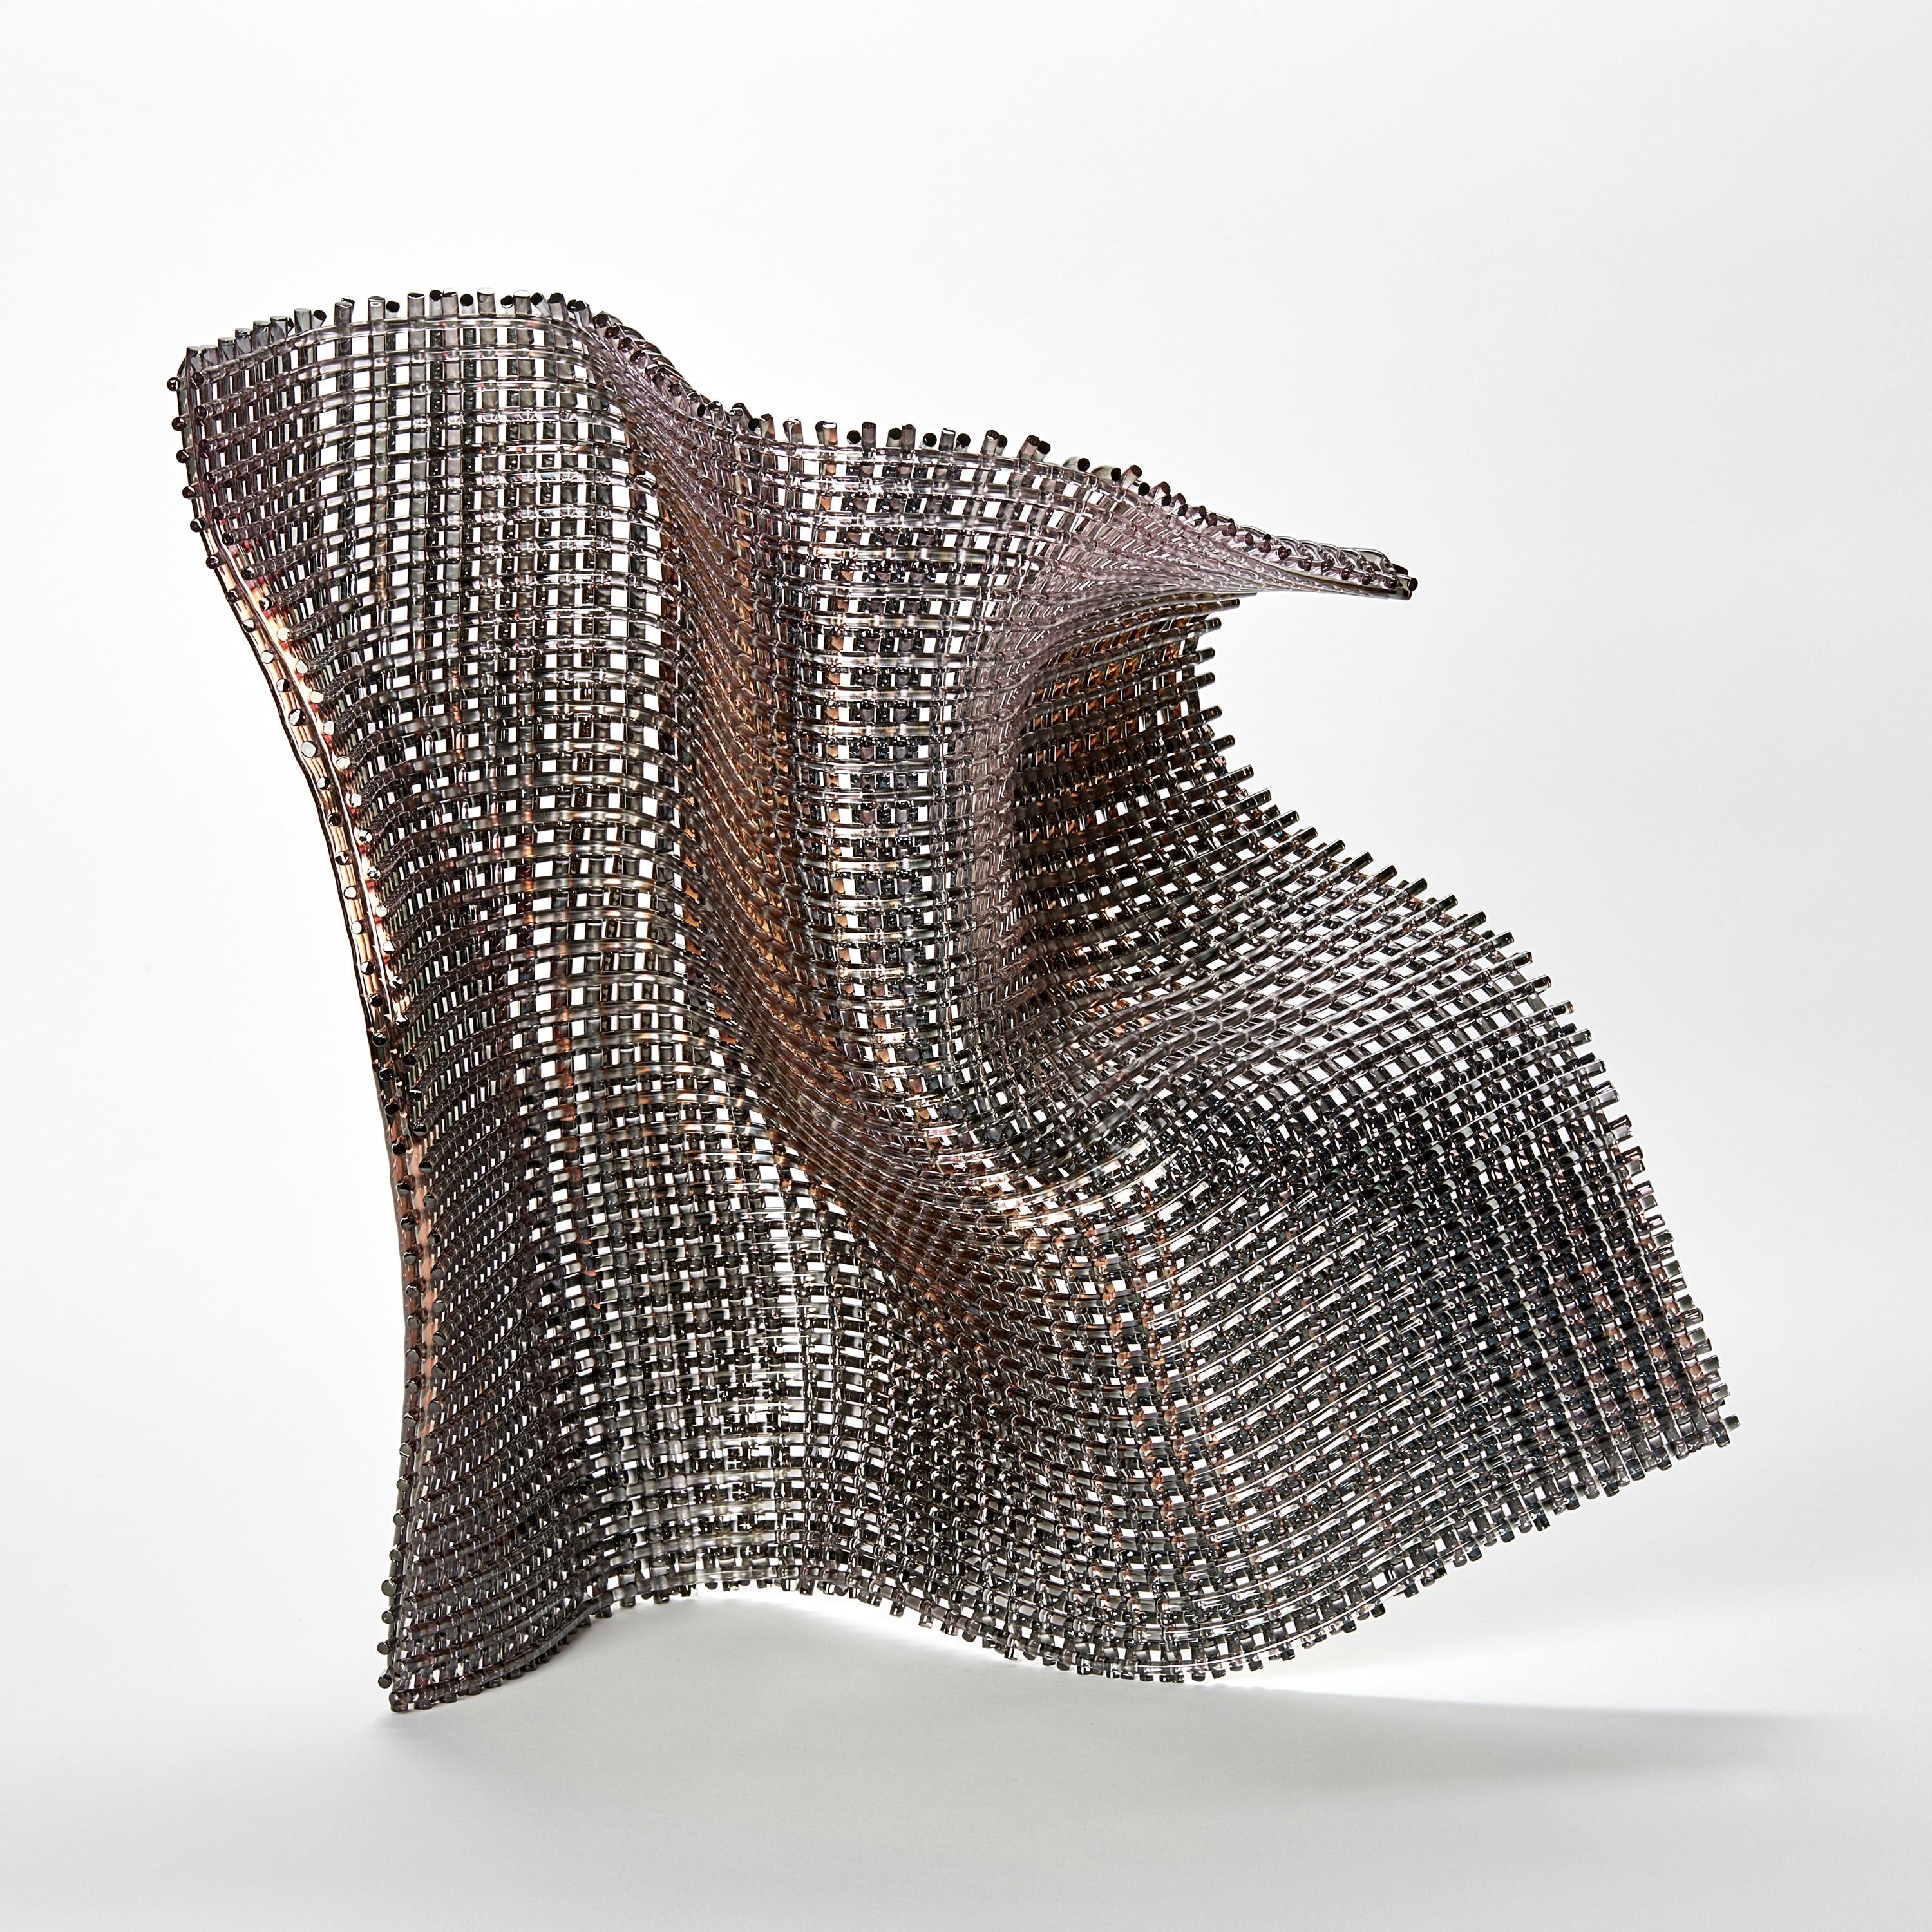 British Masquerade, a woven gold & glass standing abstract sculpture by Cathryn Shilling